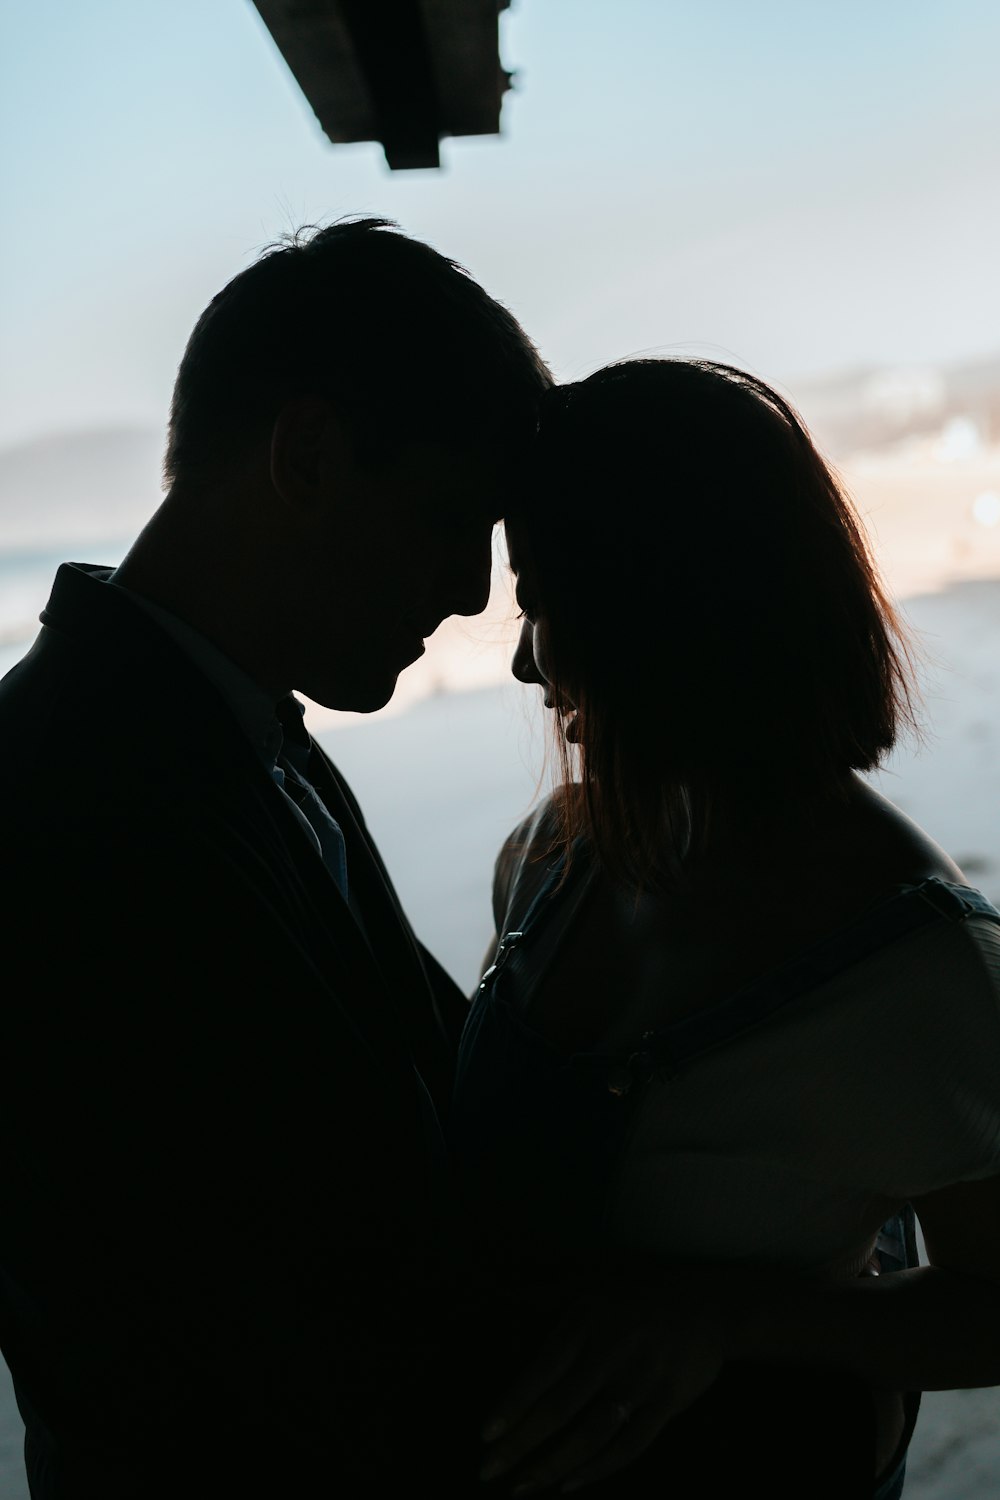 silhouette of a man and woman